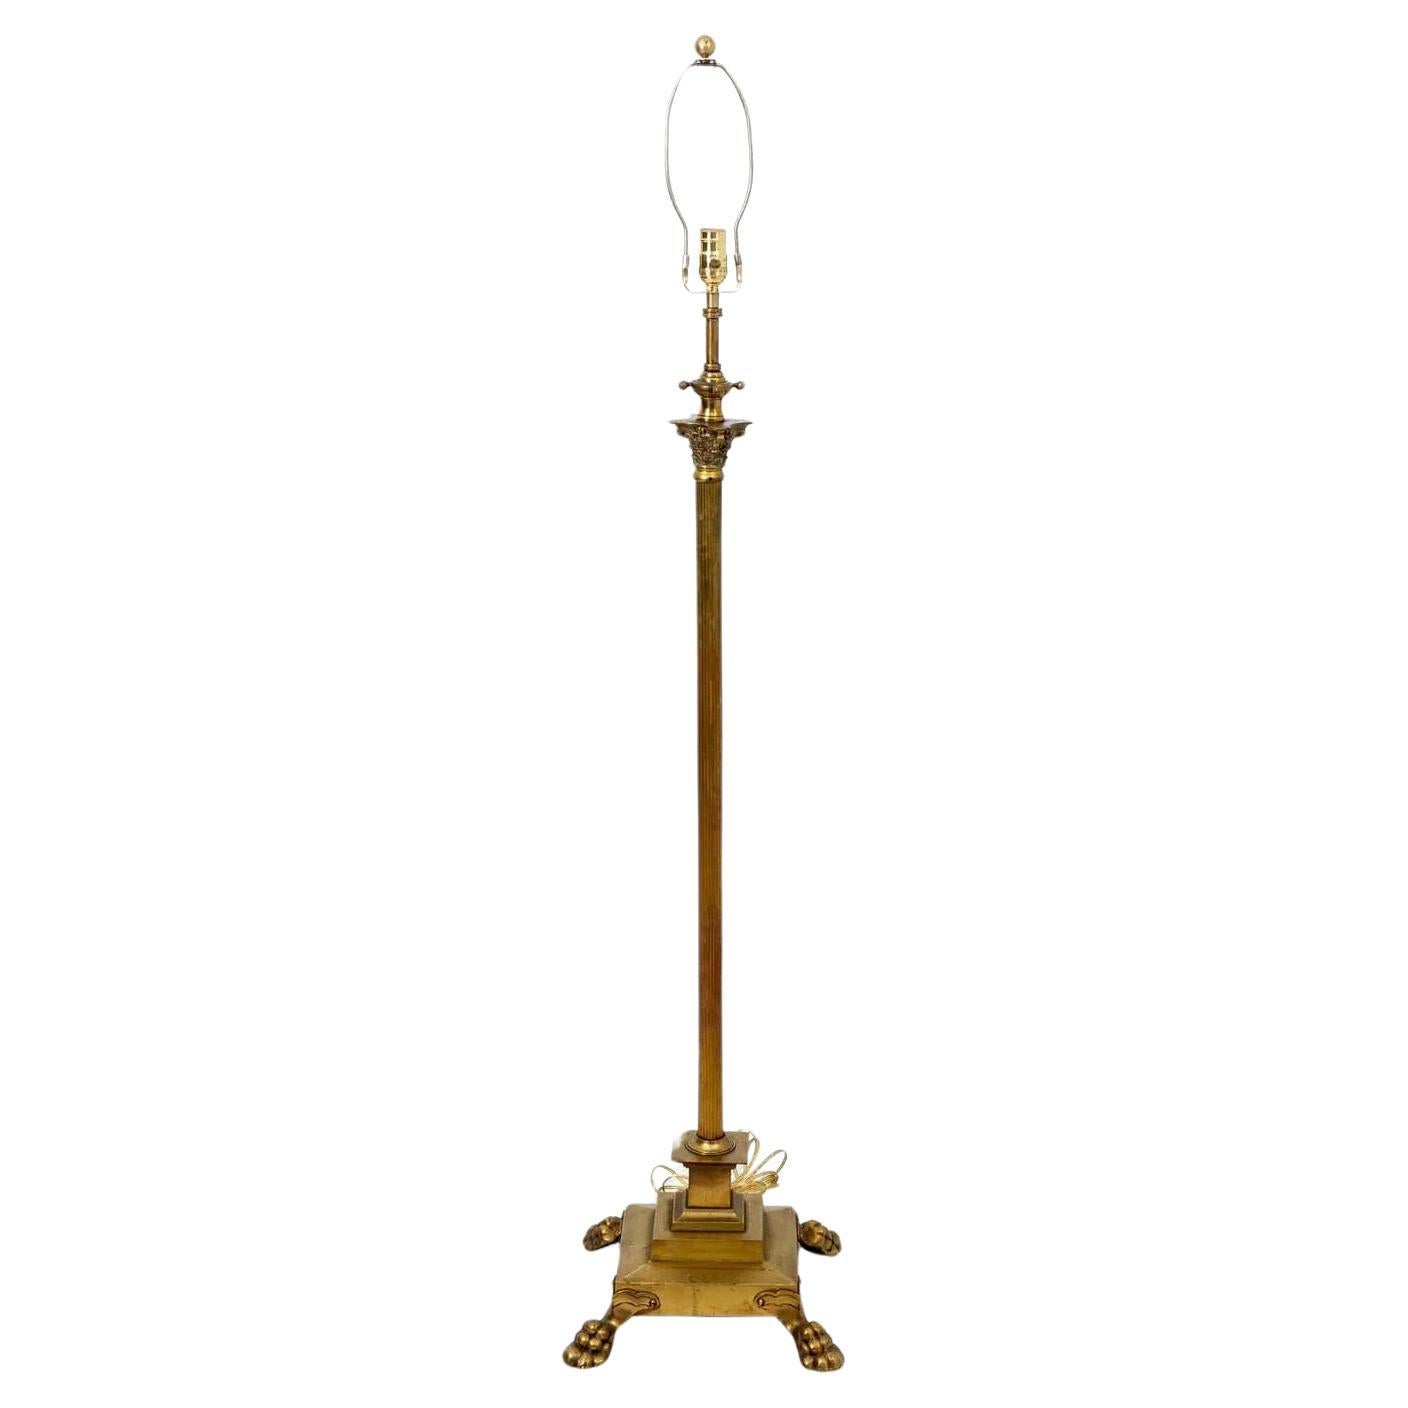 Brass Paw Foot Floor Lamp With Adjustable Height For Sale